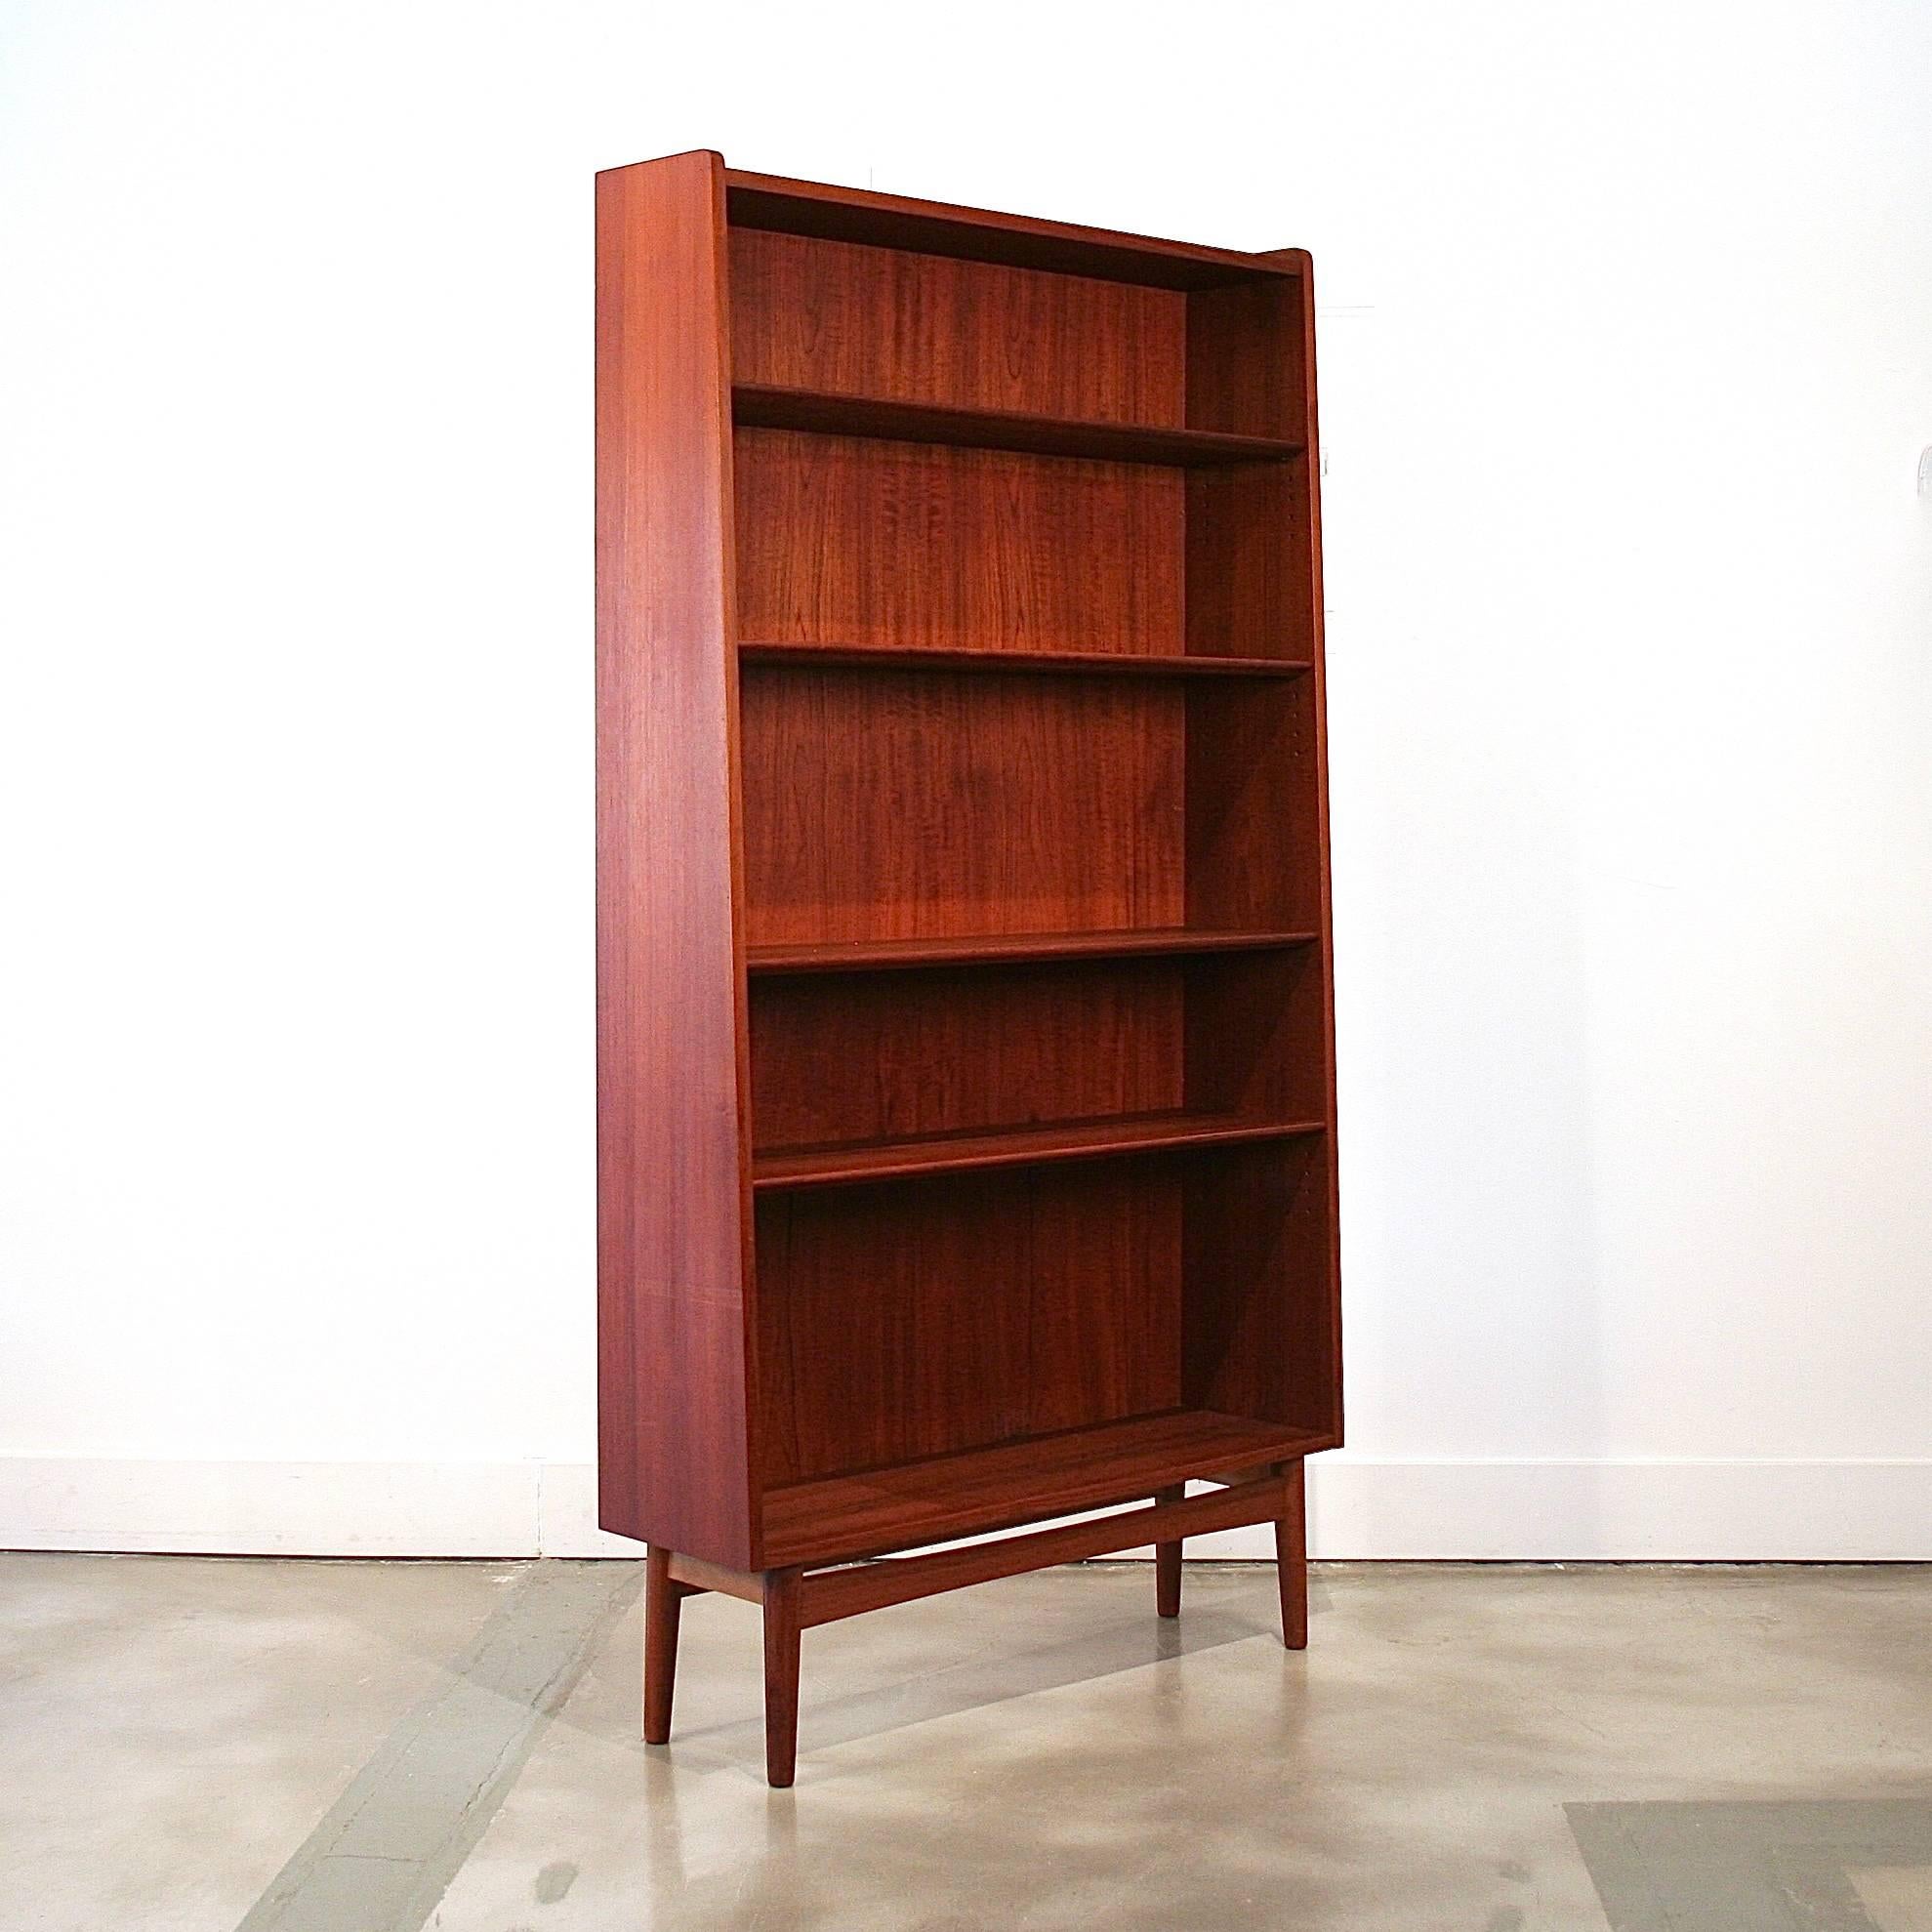 Wonderful tall vintage Danish teak bookcase with adjustable shelves and tapered sides. Made in Denmark.